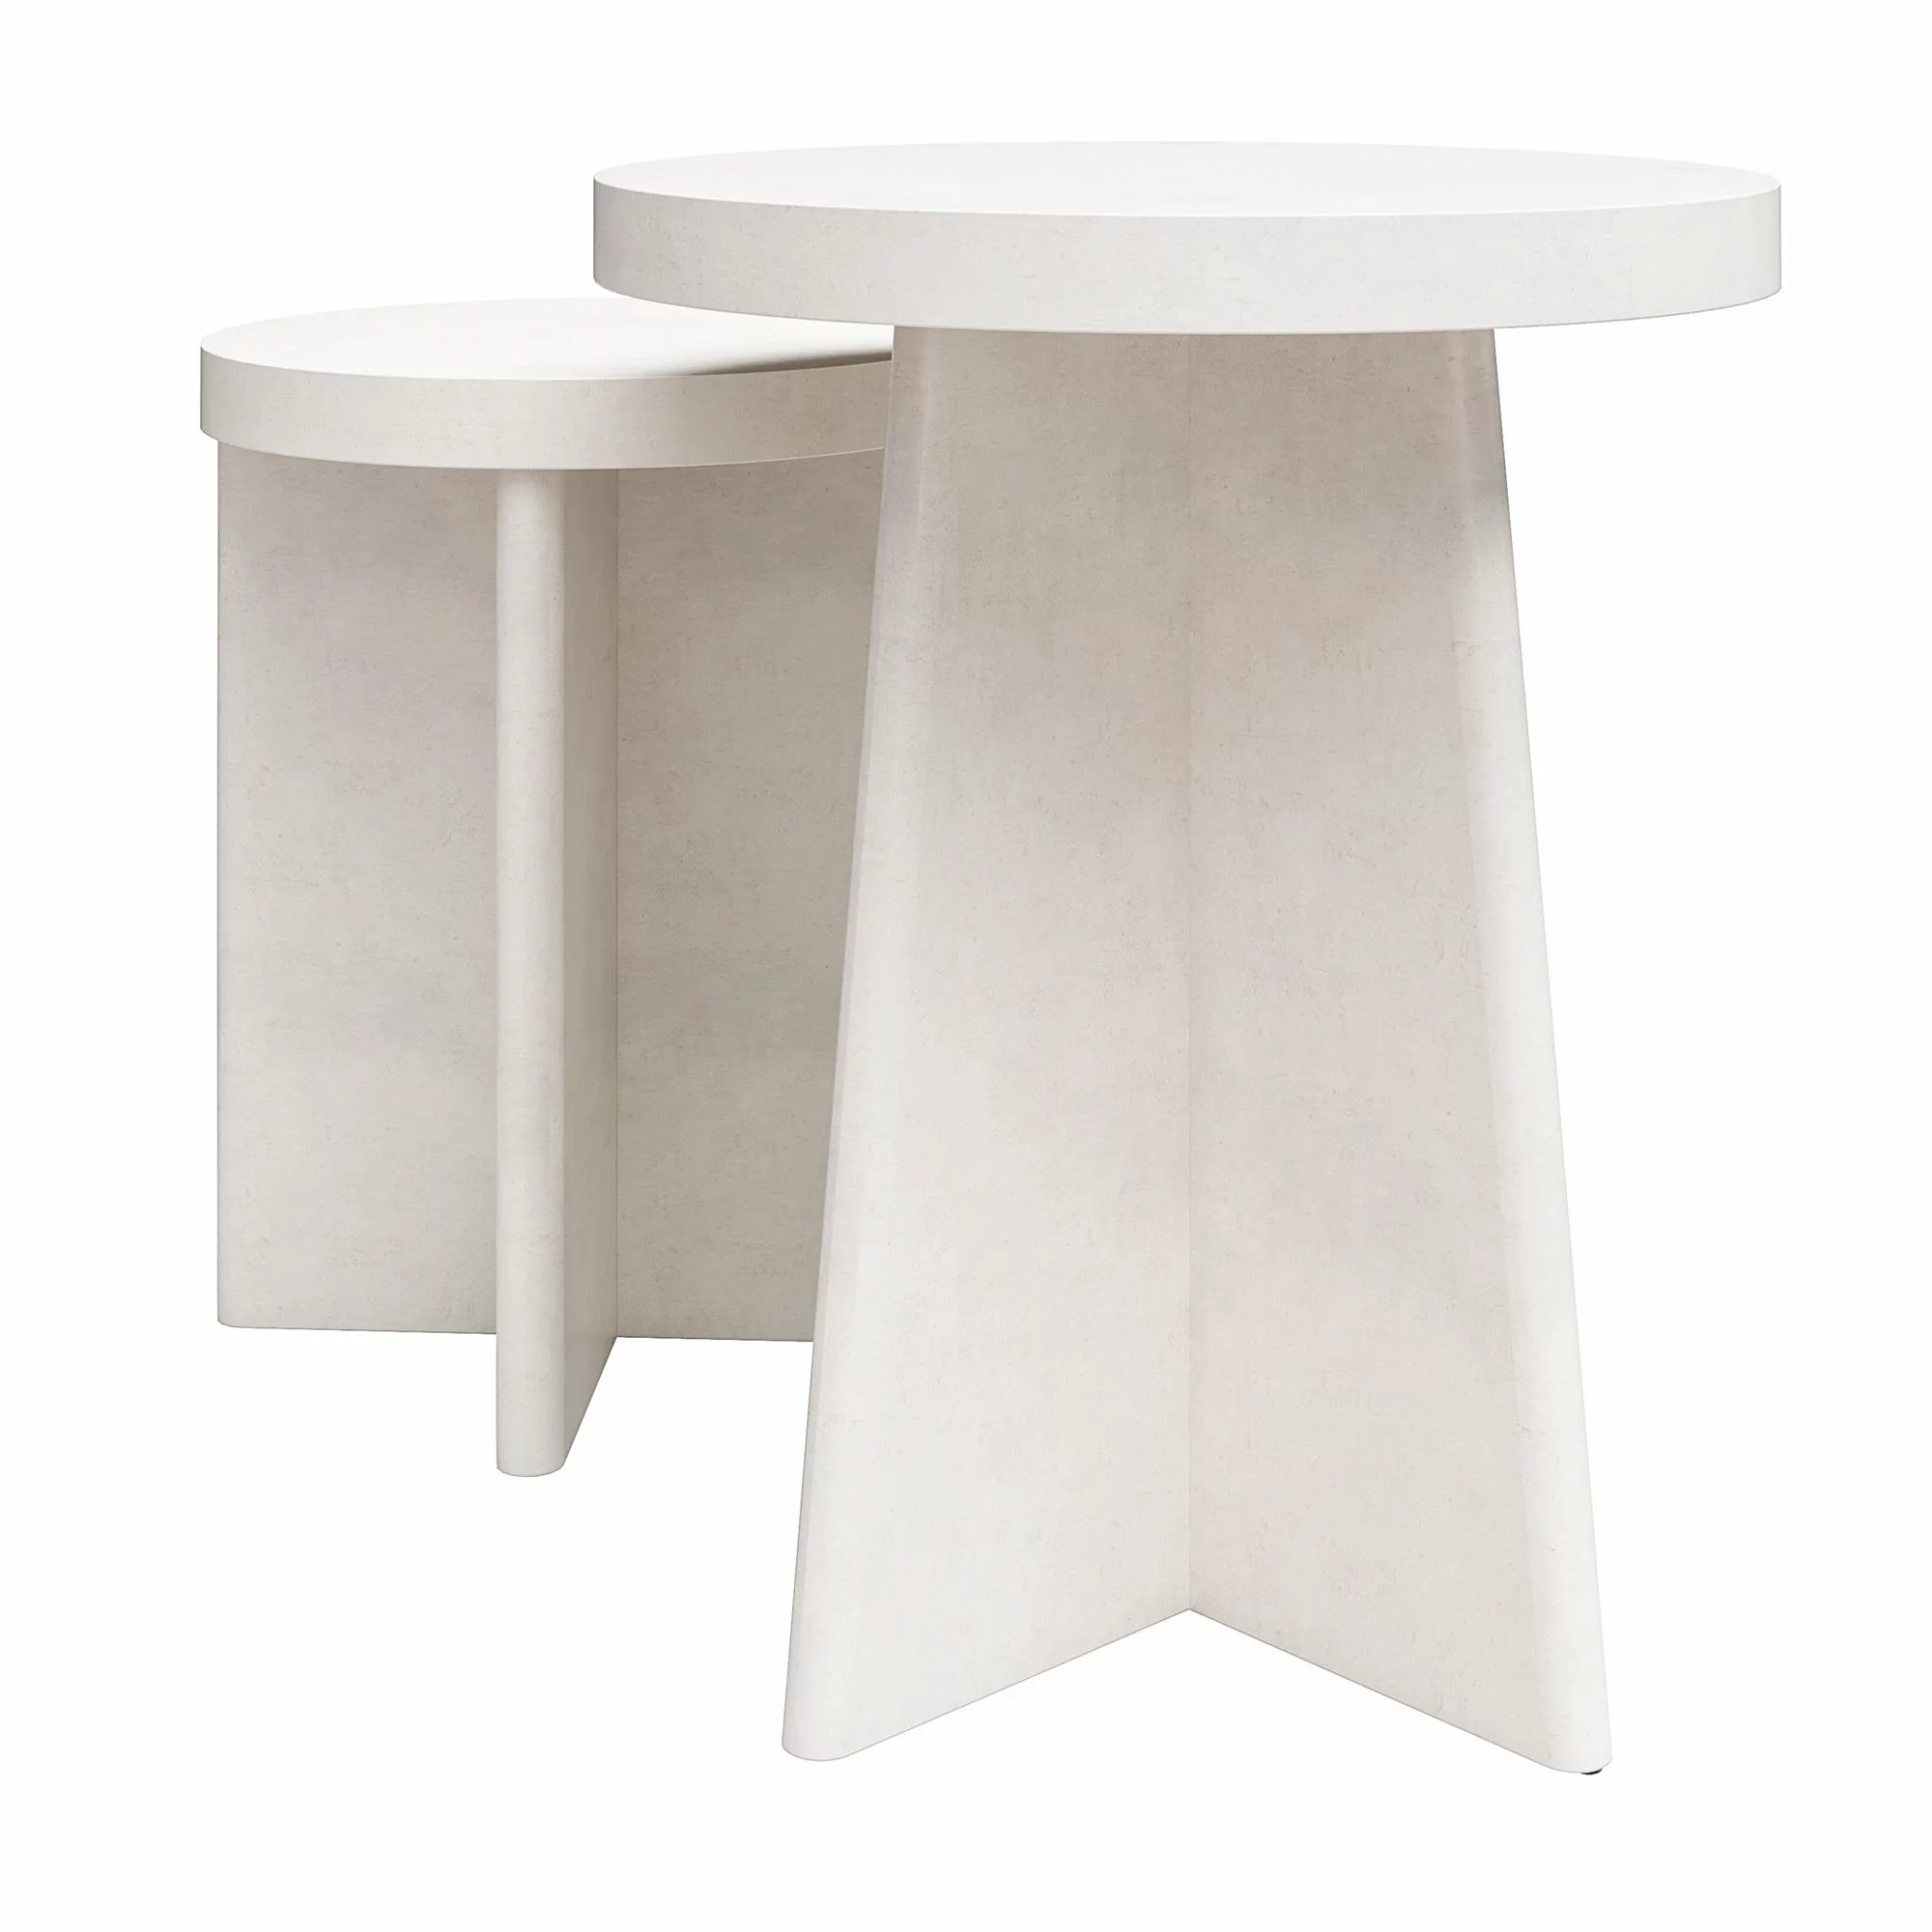 Queer Eye Liam Round End Tables, Set Of 2, Plaster – Walmart In 2023 |  Round End Tables, End Tables, Table For Small Space Regarding Liam Round Plaster Coffee Tables (View 7 of 15)